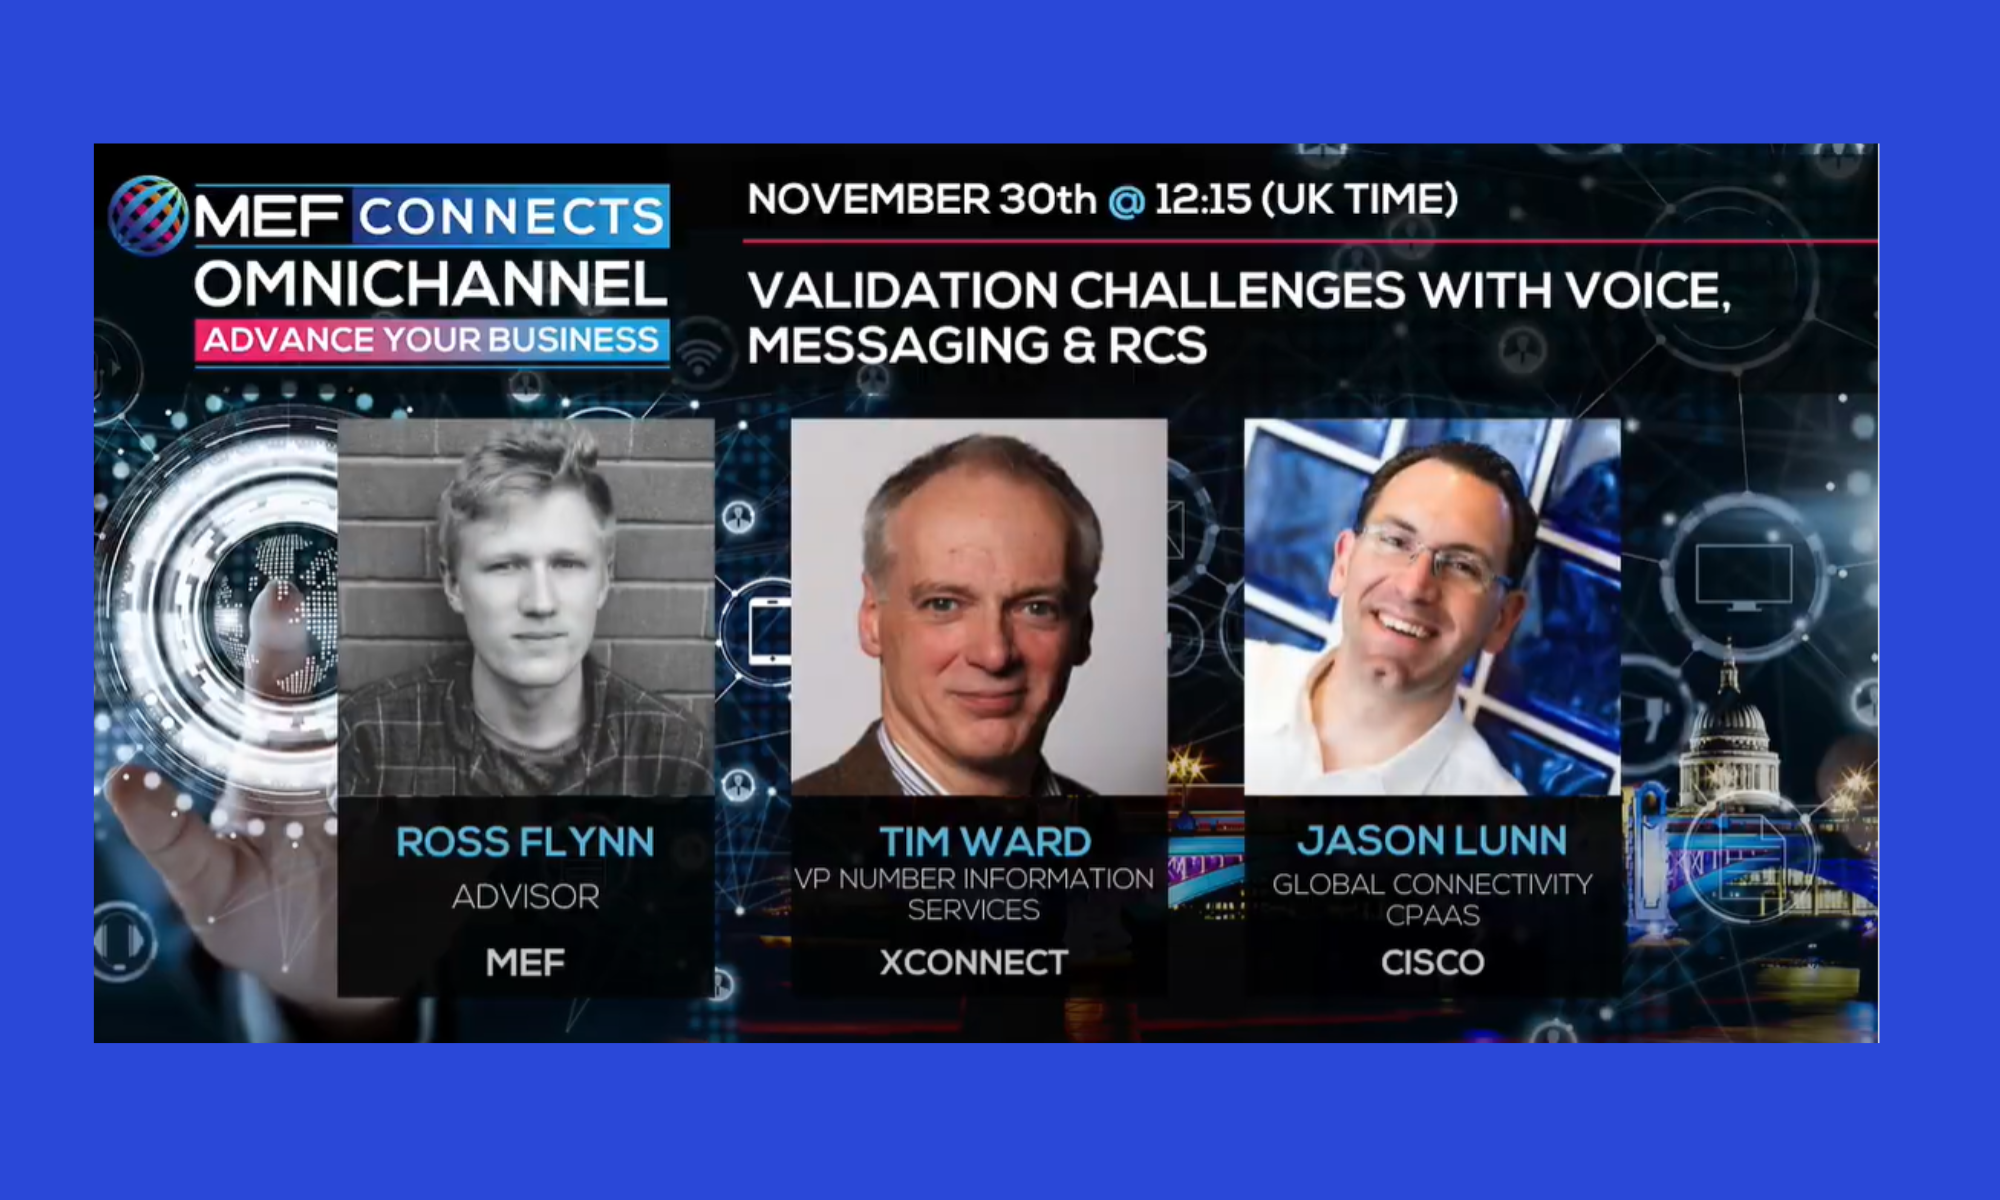 Validation Challenges With Voice, Messaging & RCS